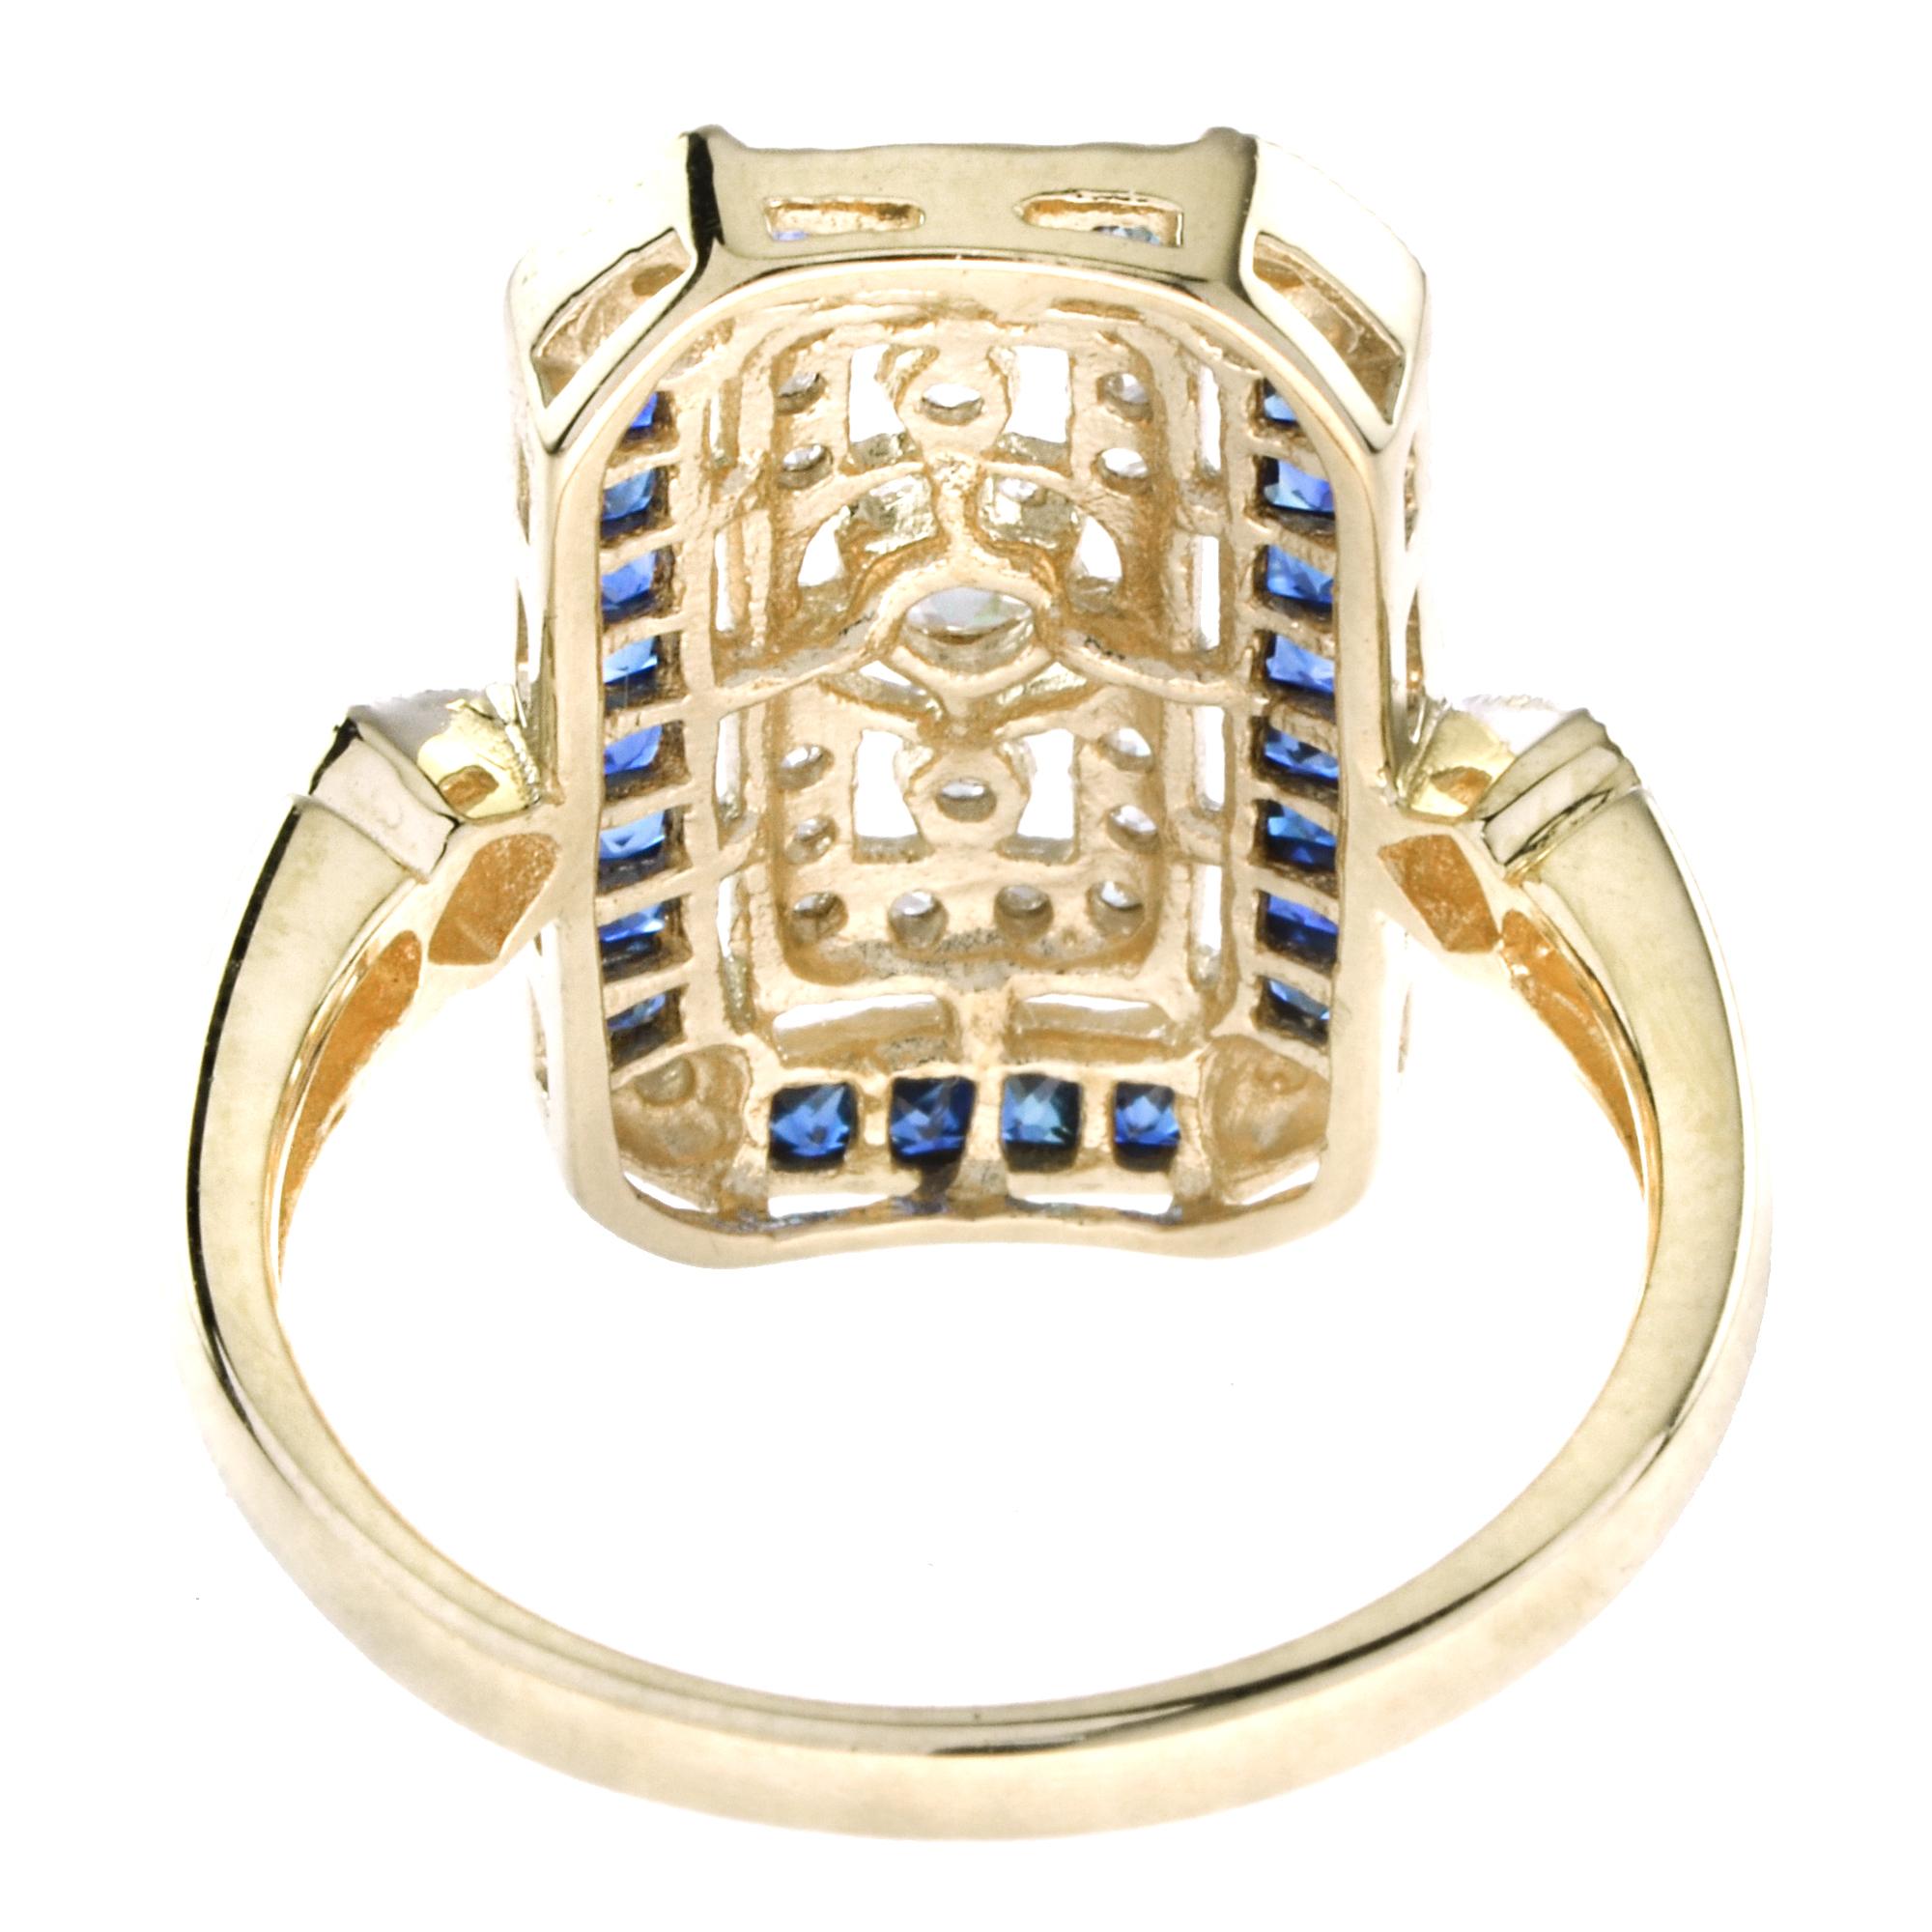 For Sale:  Old Cut Diamond and Sapphire Antique Style Filigree Ring in 14K Yellow Gold 4